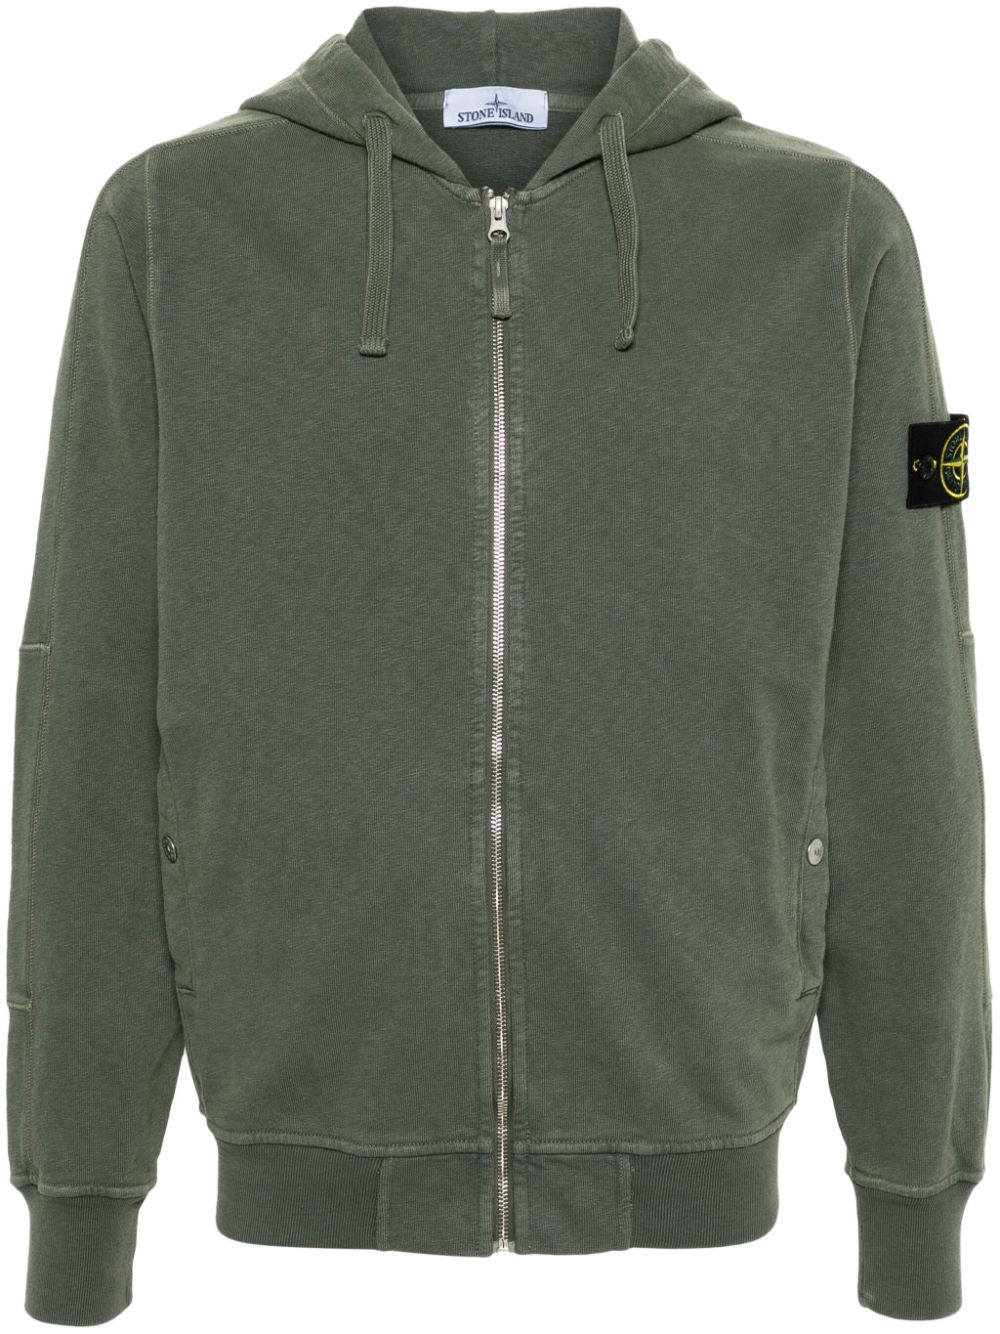 Compass-badge zipped hoodie<BR/><BR/><BR/>